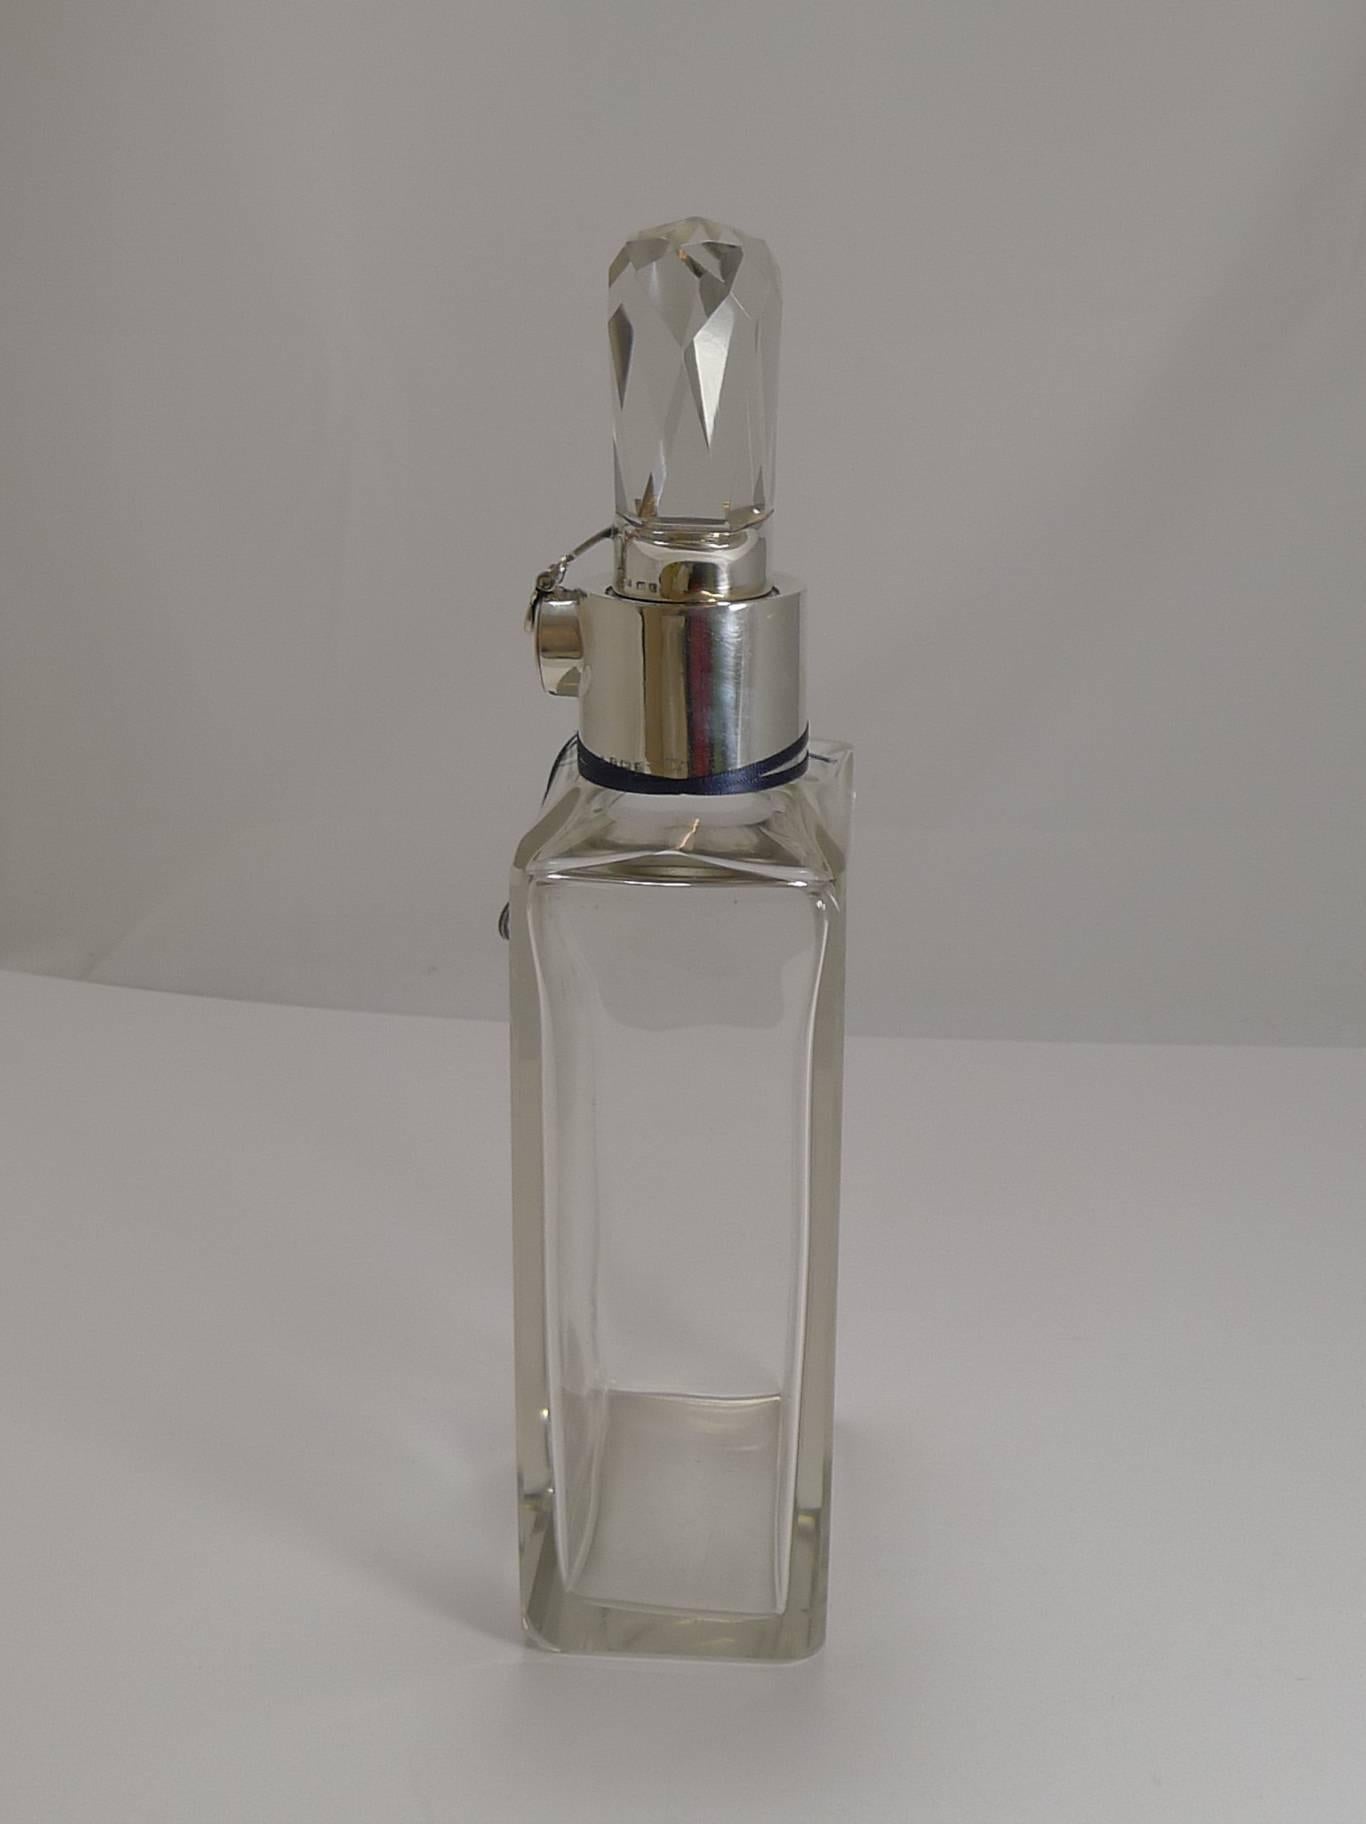 Highly sought-after and certainly scarce, this is a truly stylish crystal decanter with beautifully cut top. This one is an early example of its kind, undoubtedly designed by Hukin and Heath for the luxury London retailer, Asprey and Co. of Bond